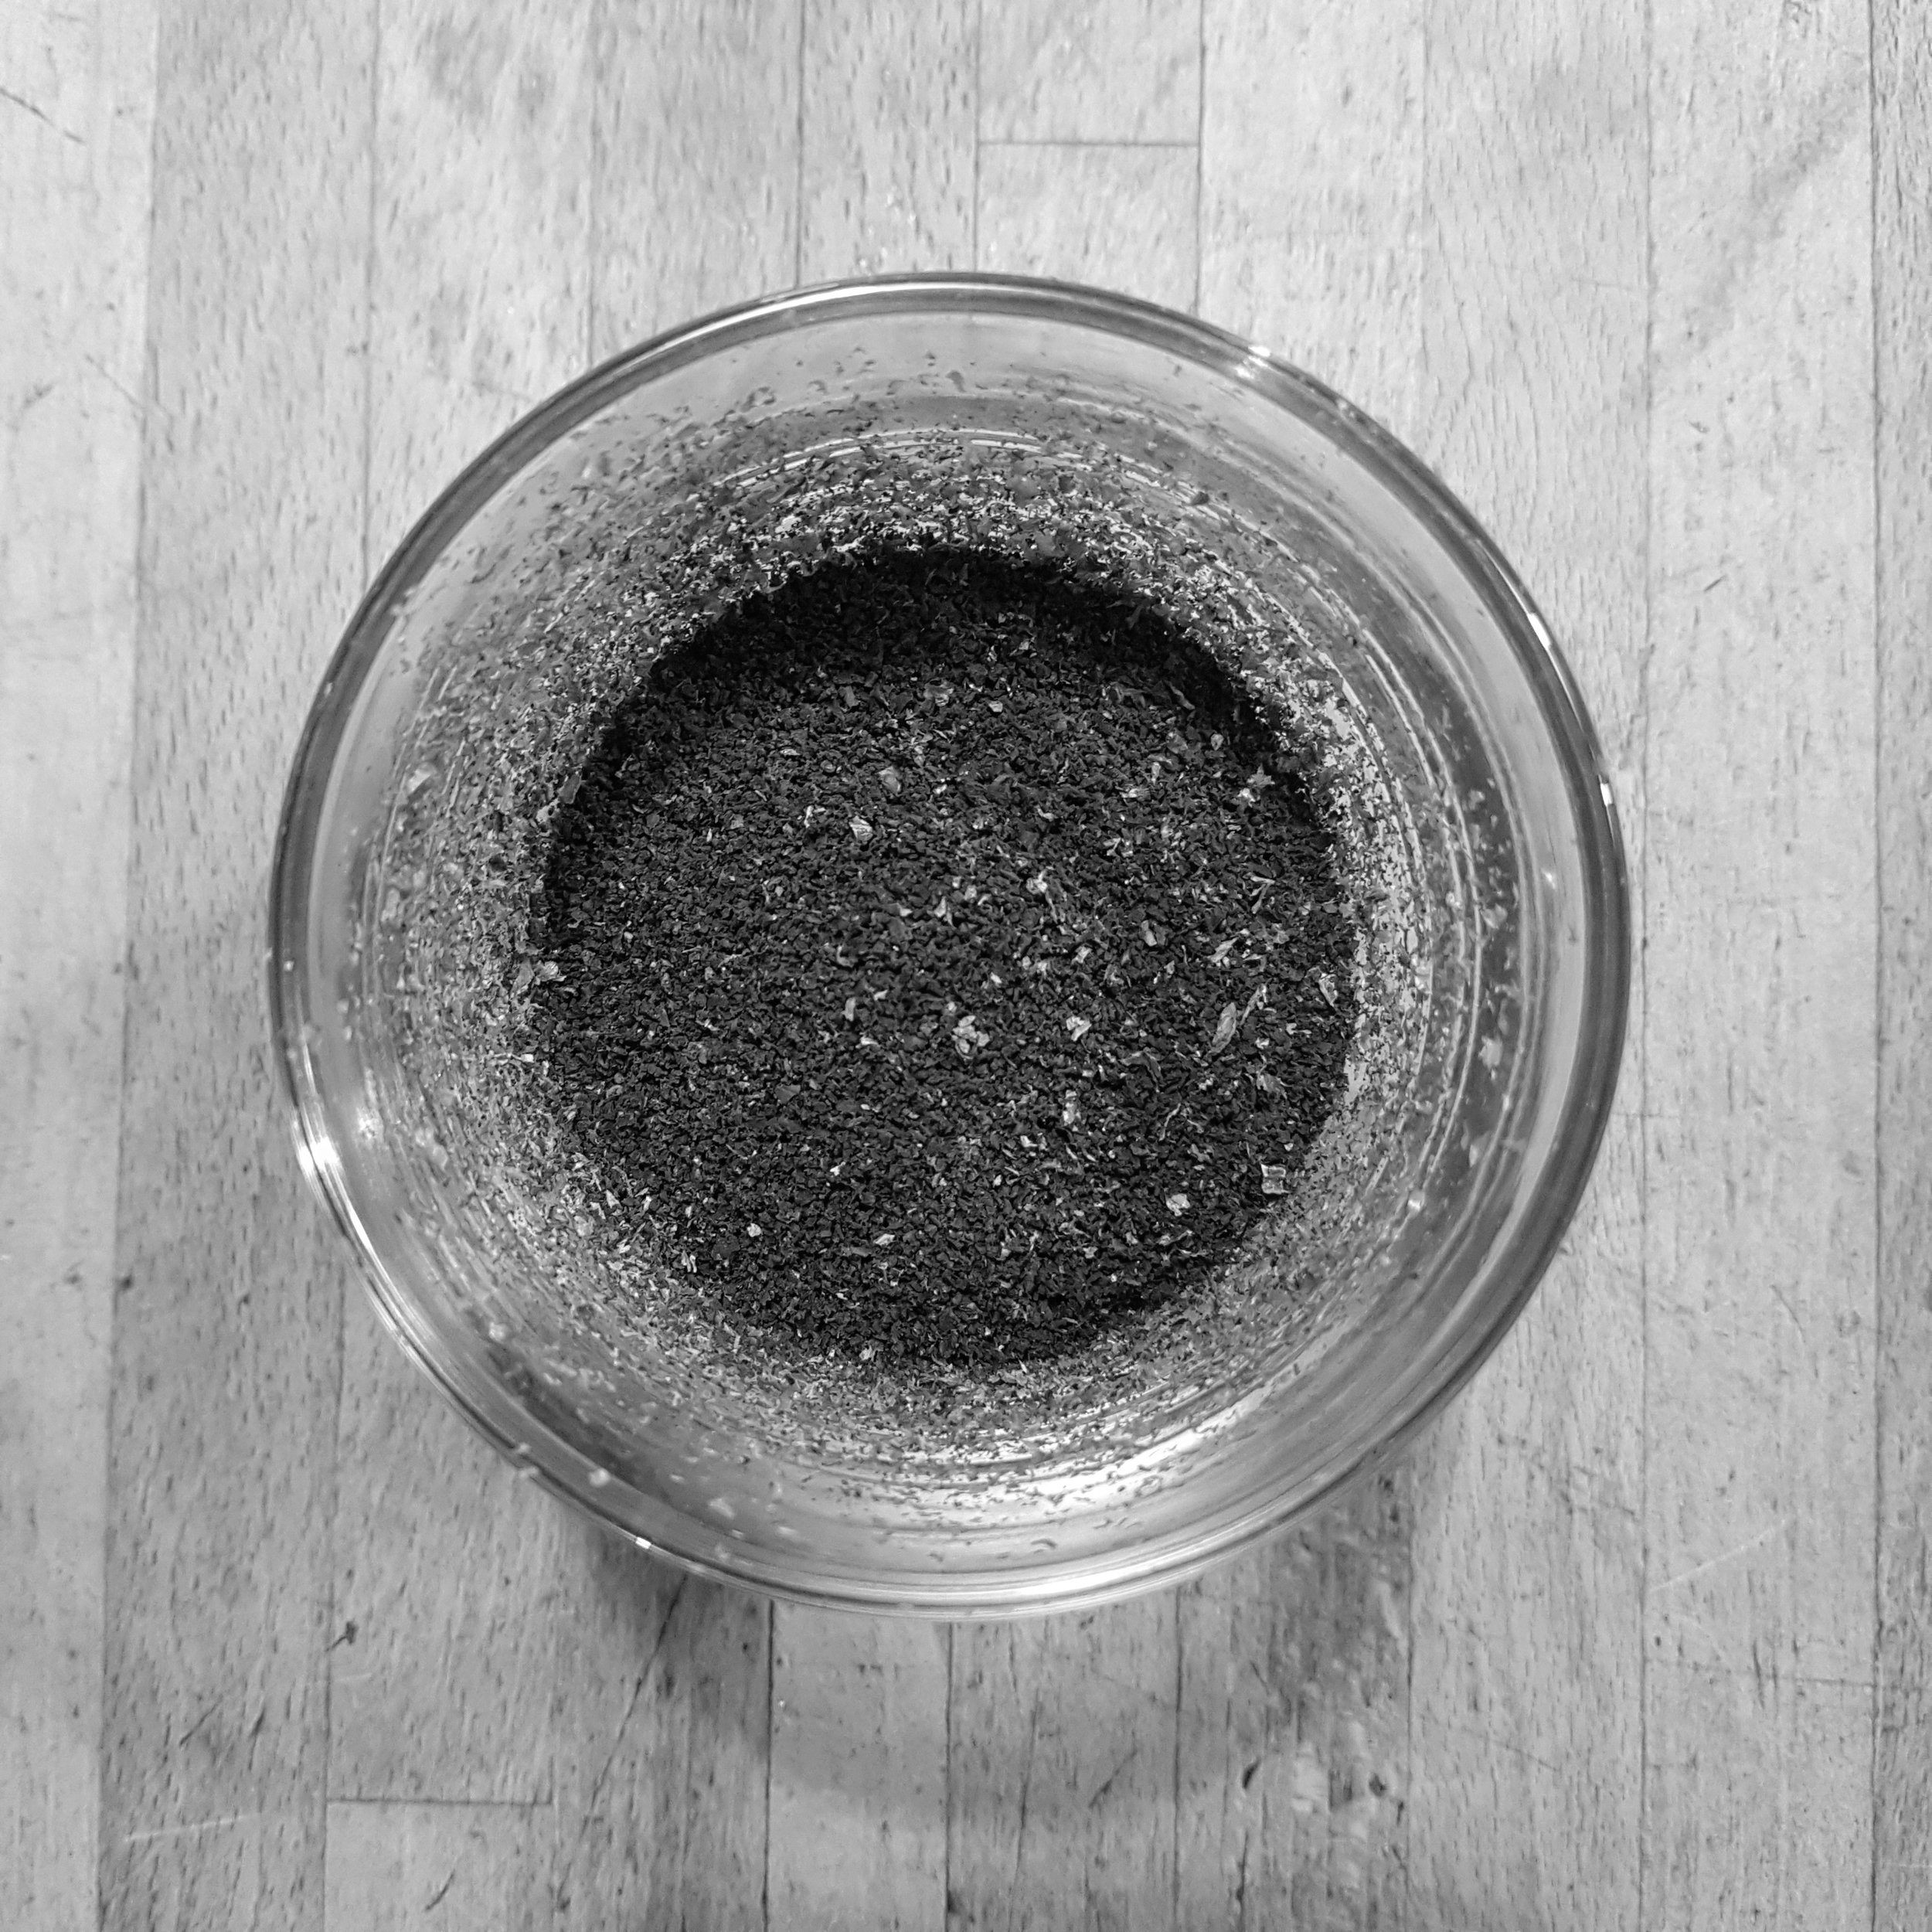 Coffee grounds in a glass, seen from above